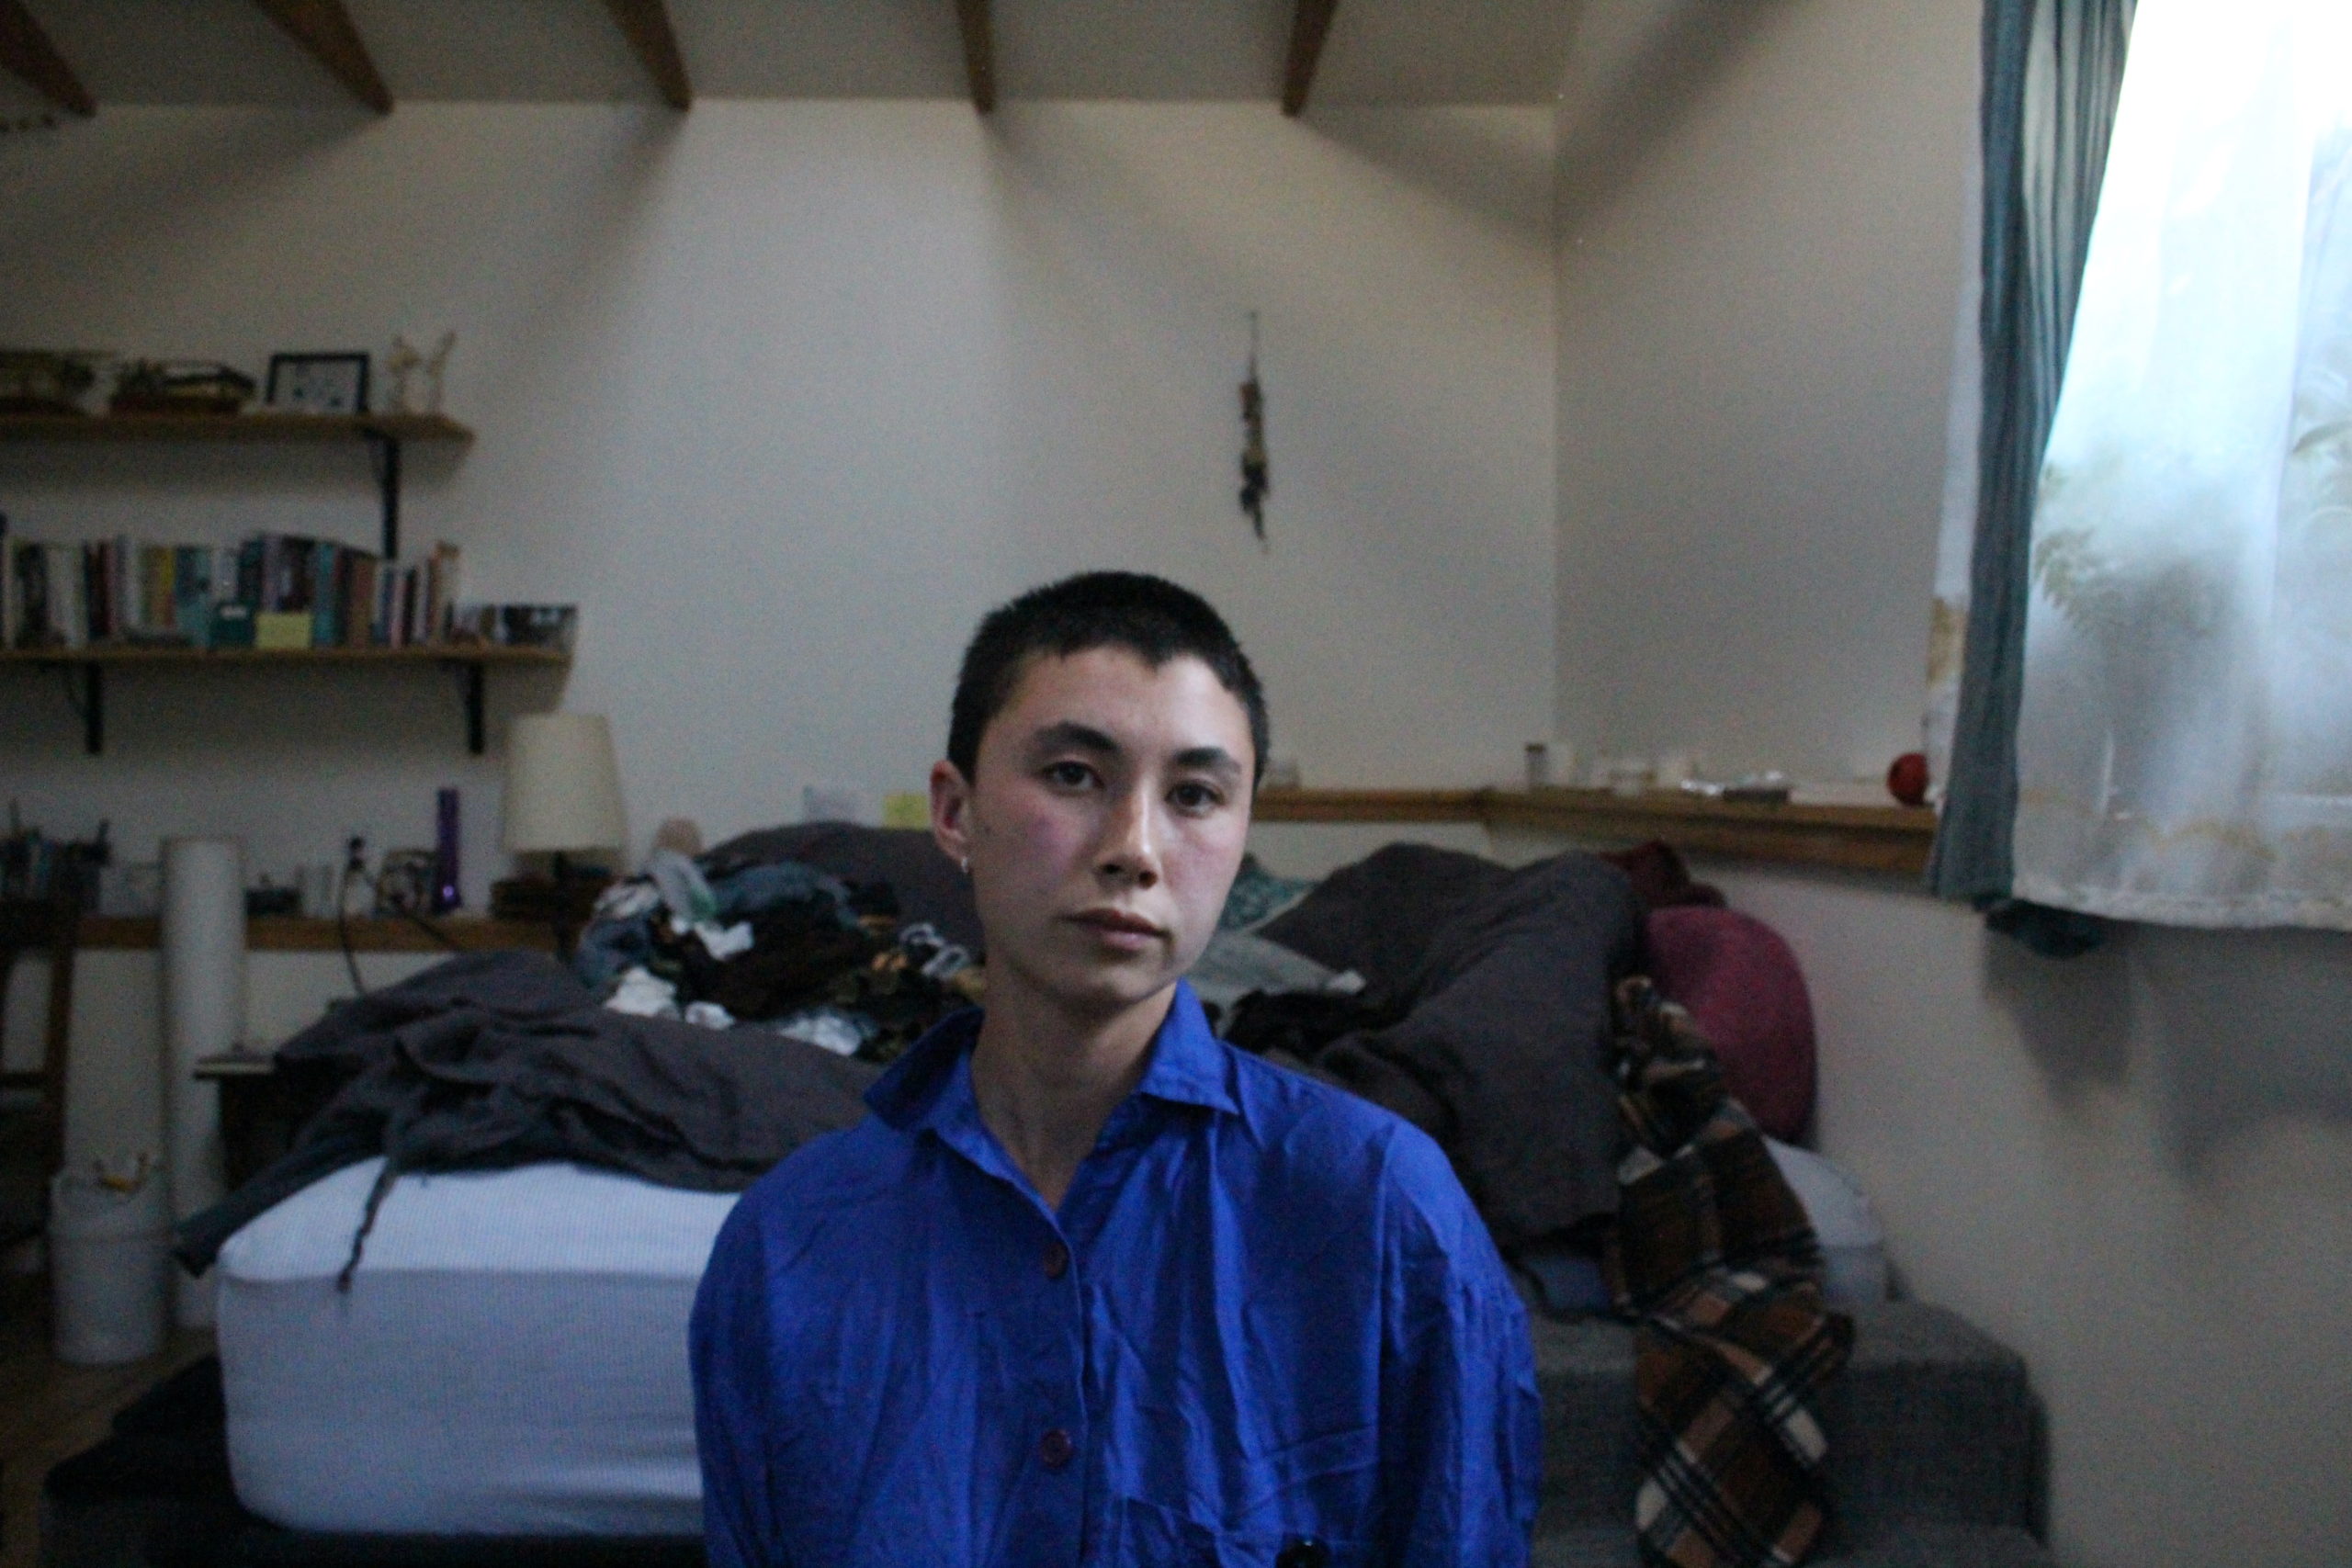 Portrait of person in a blue shirt in their room, positioned in front of a bed that is full of blankets.